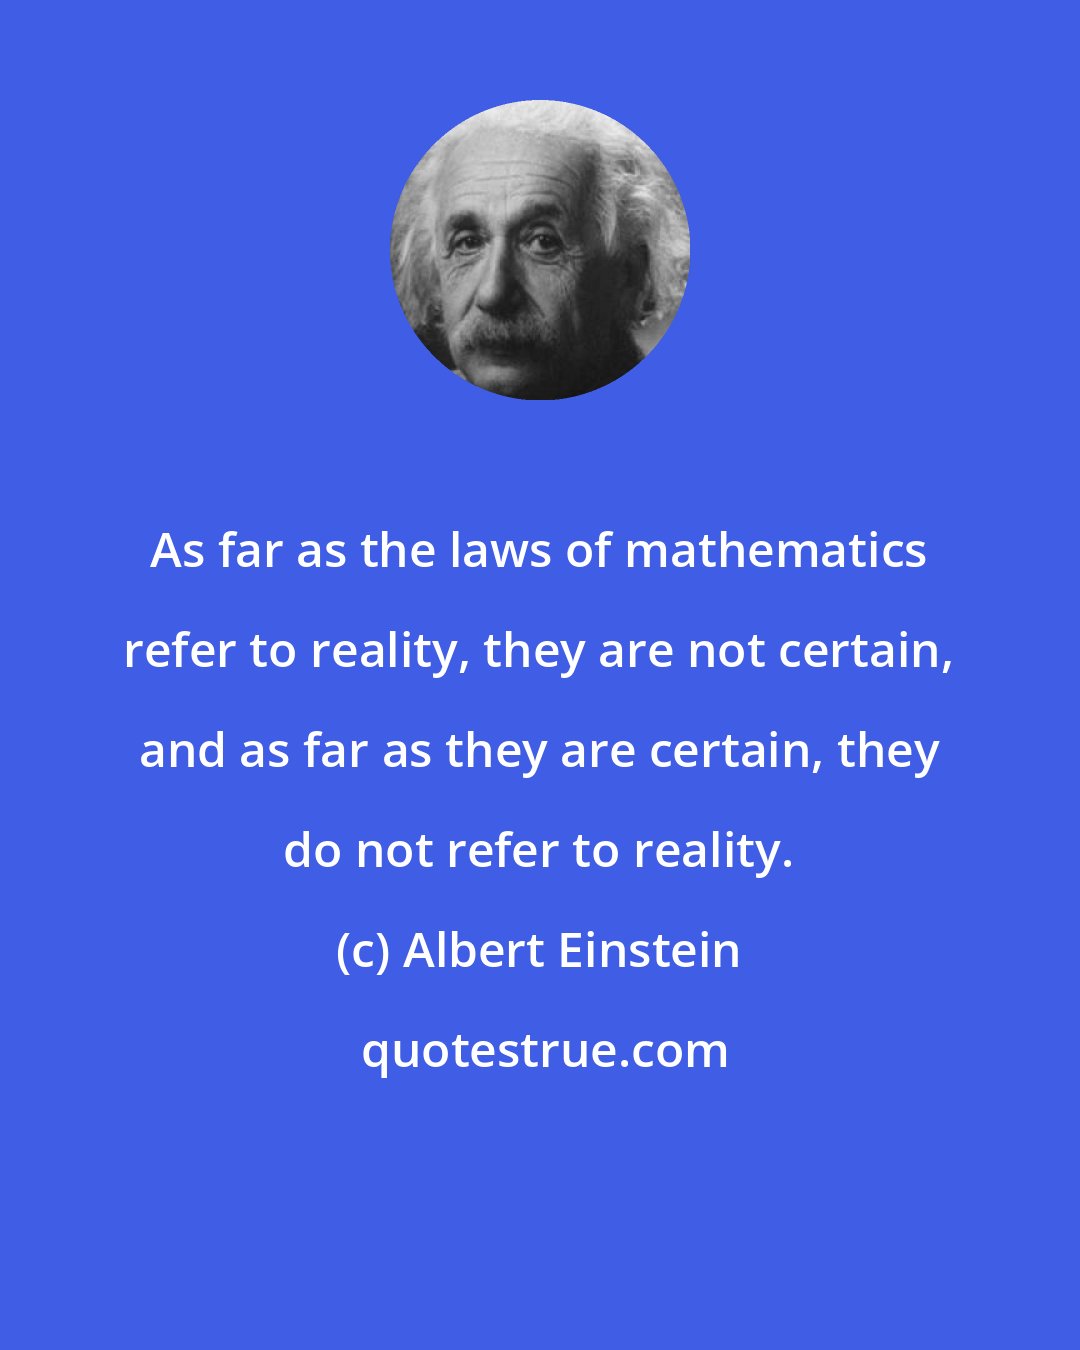 Albert Einstein: As far as the laws of mathematics refer to reality, they are not certain, and as far as they are certain, they do not refer to reality.